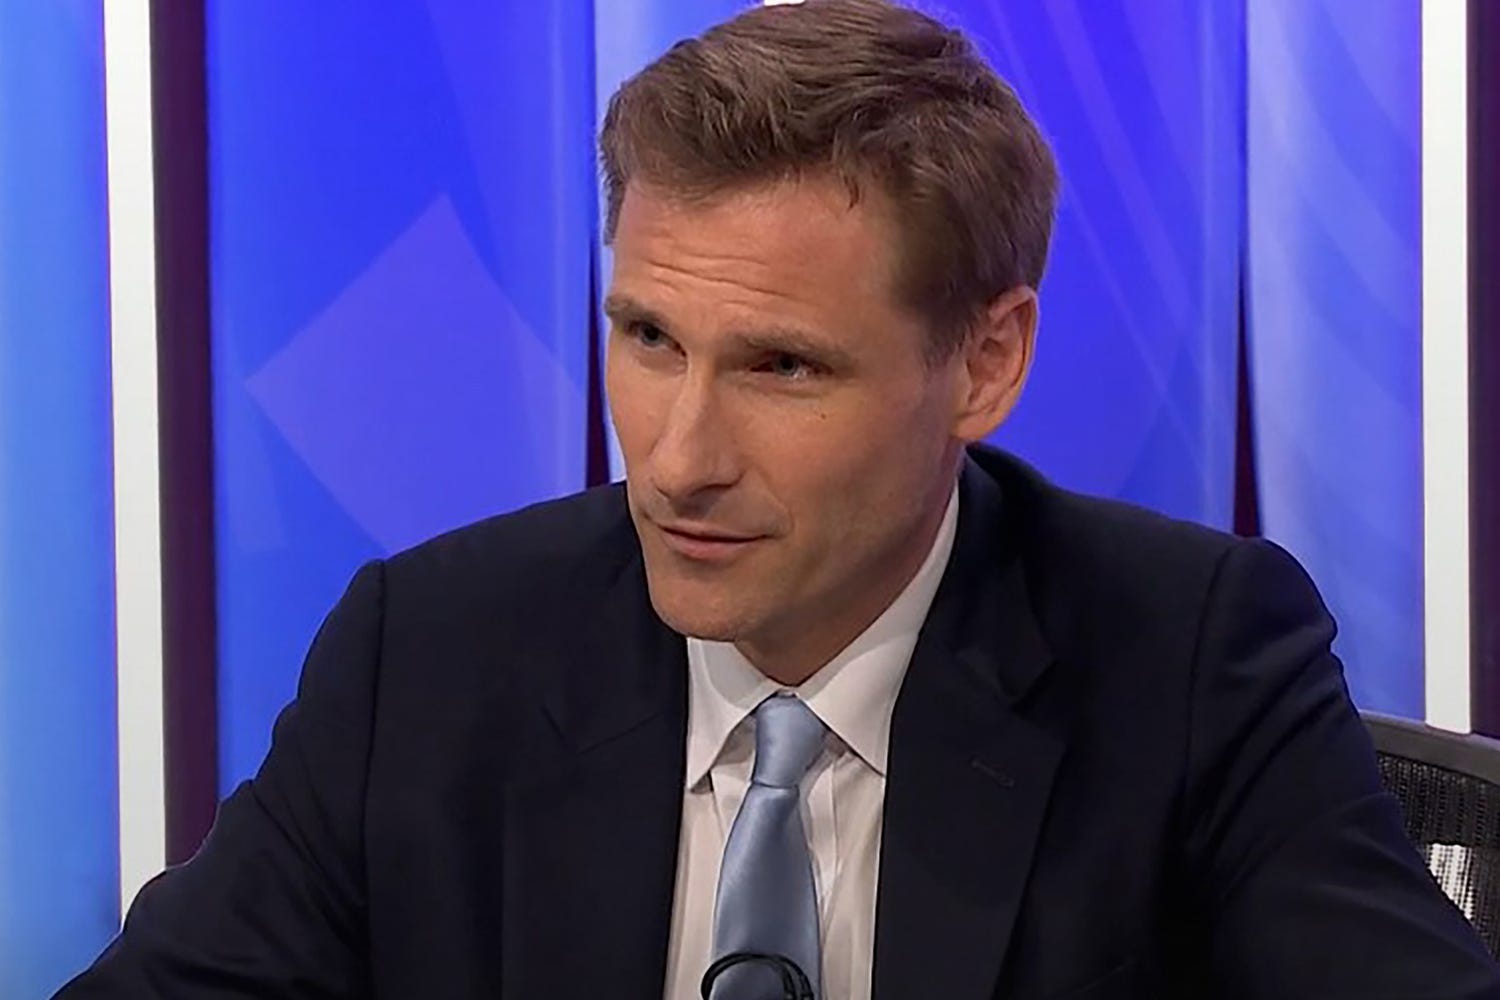 Policing minister Chris Philp appeared to confuse the neighbouring countries of Rwanda and the Democratic Republic of the Congo on Question Time (Screengrab/BBC)